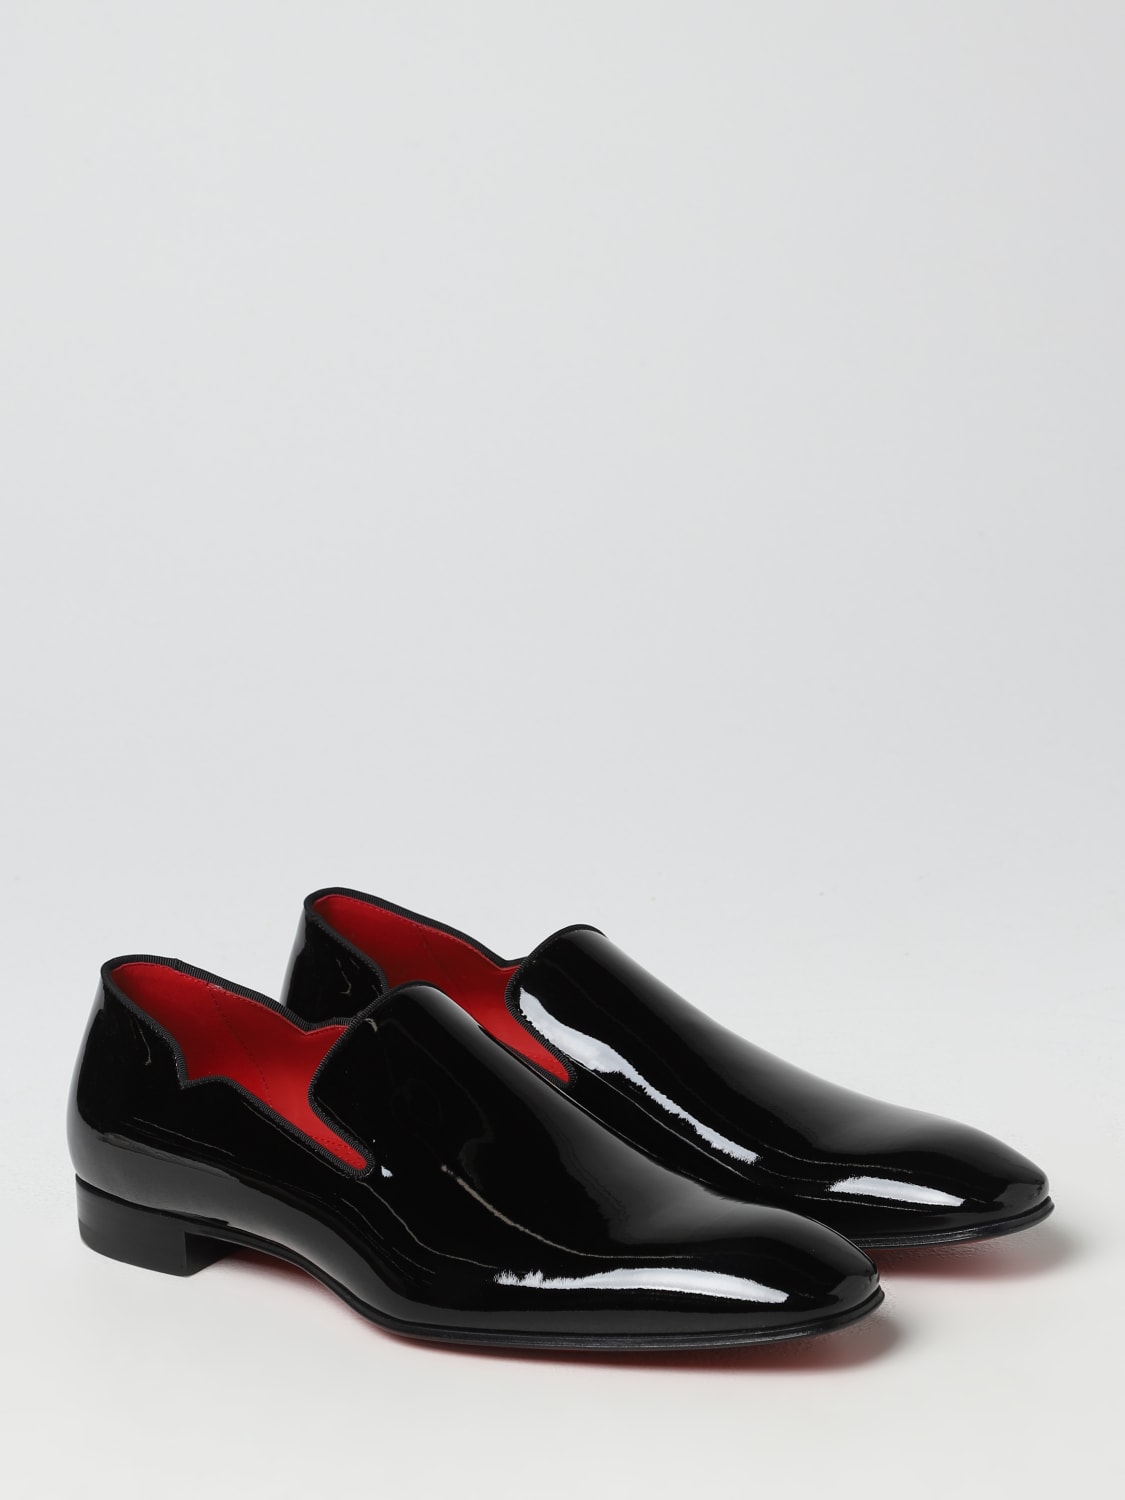 CHRISTIAN LOUBOUTIN: Dandy Chick patent moccasins - Black | Louboutin loafers 3220212 online at GIGLIO.COM